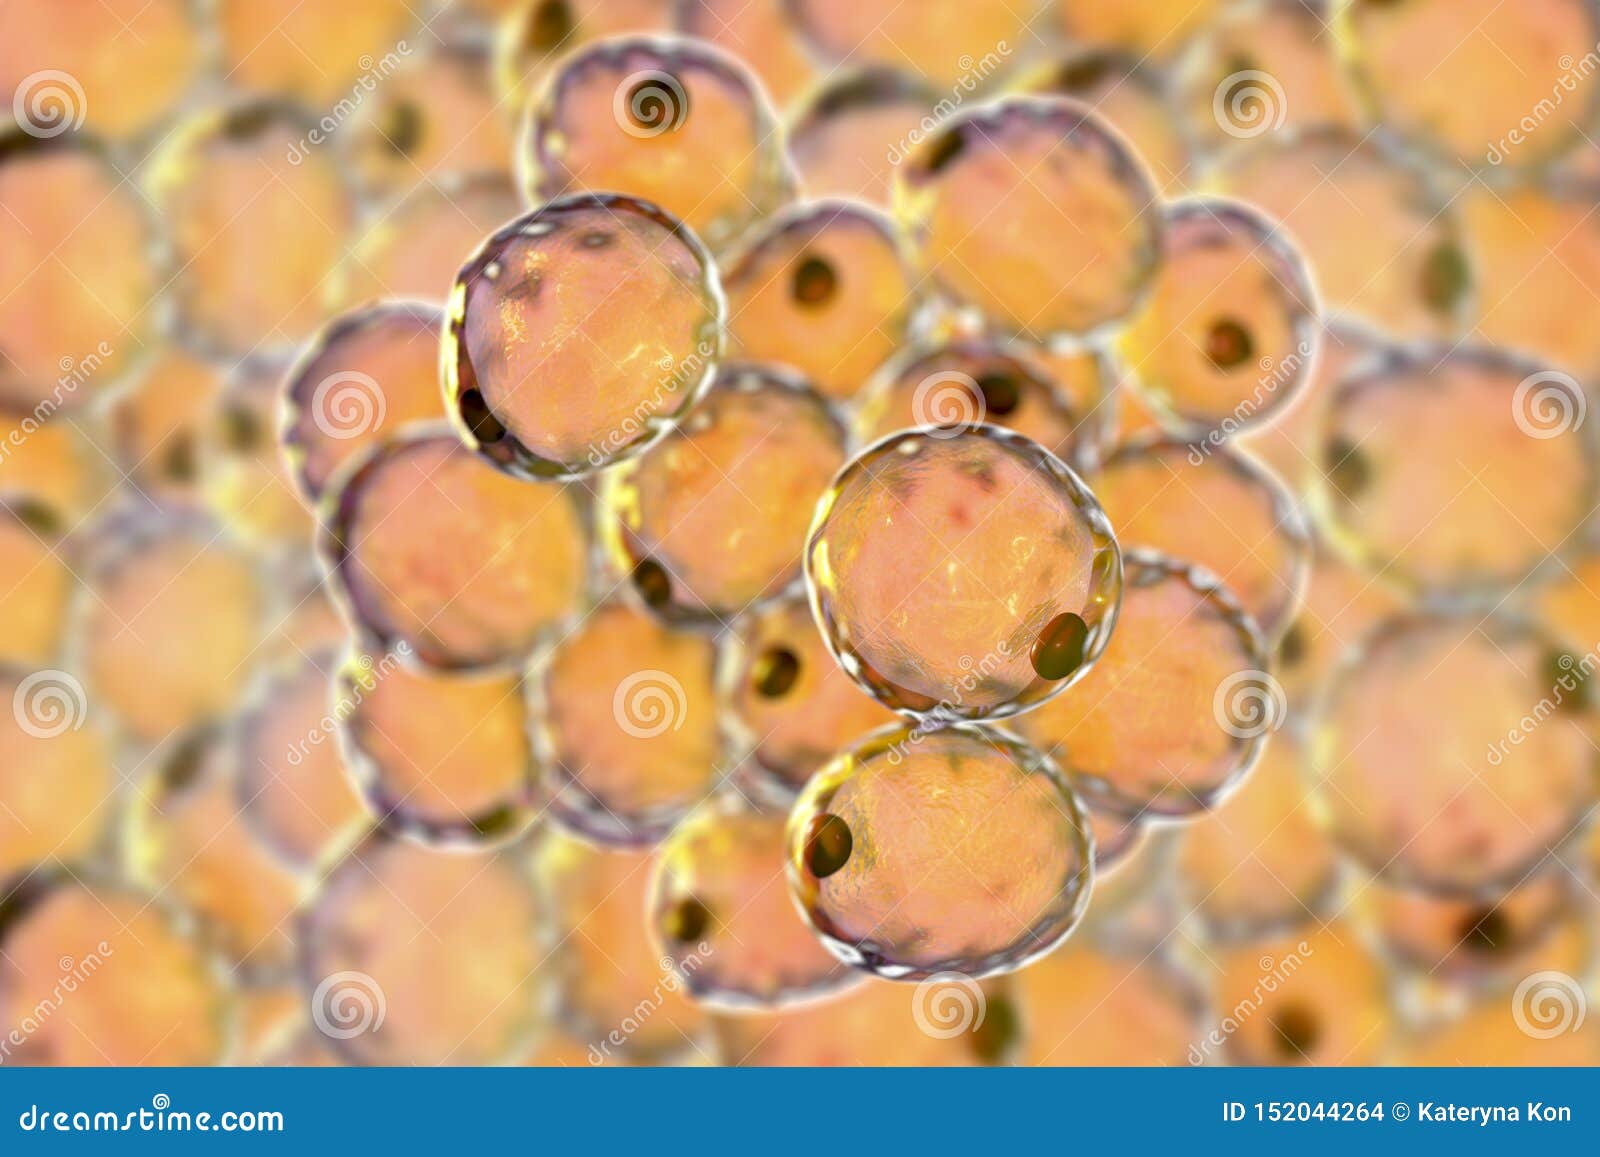 fat cells, or adipose cells